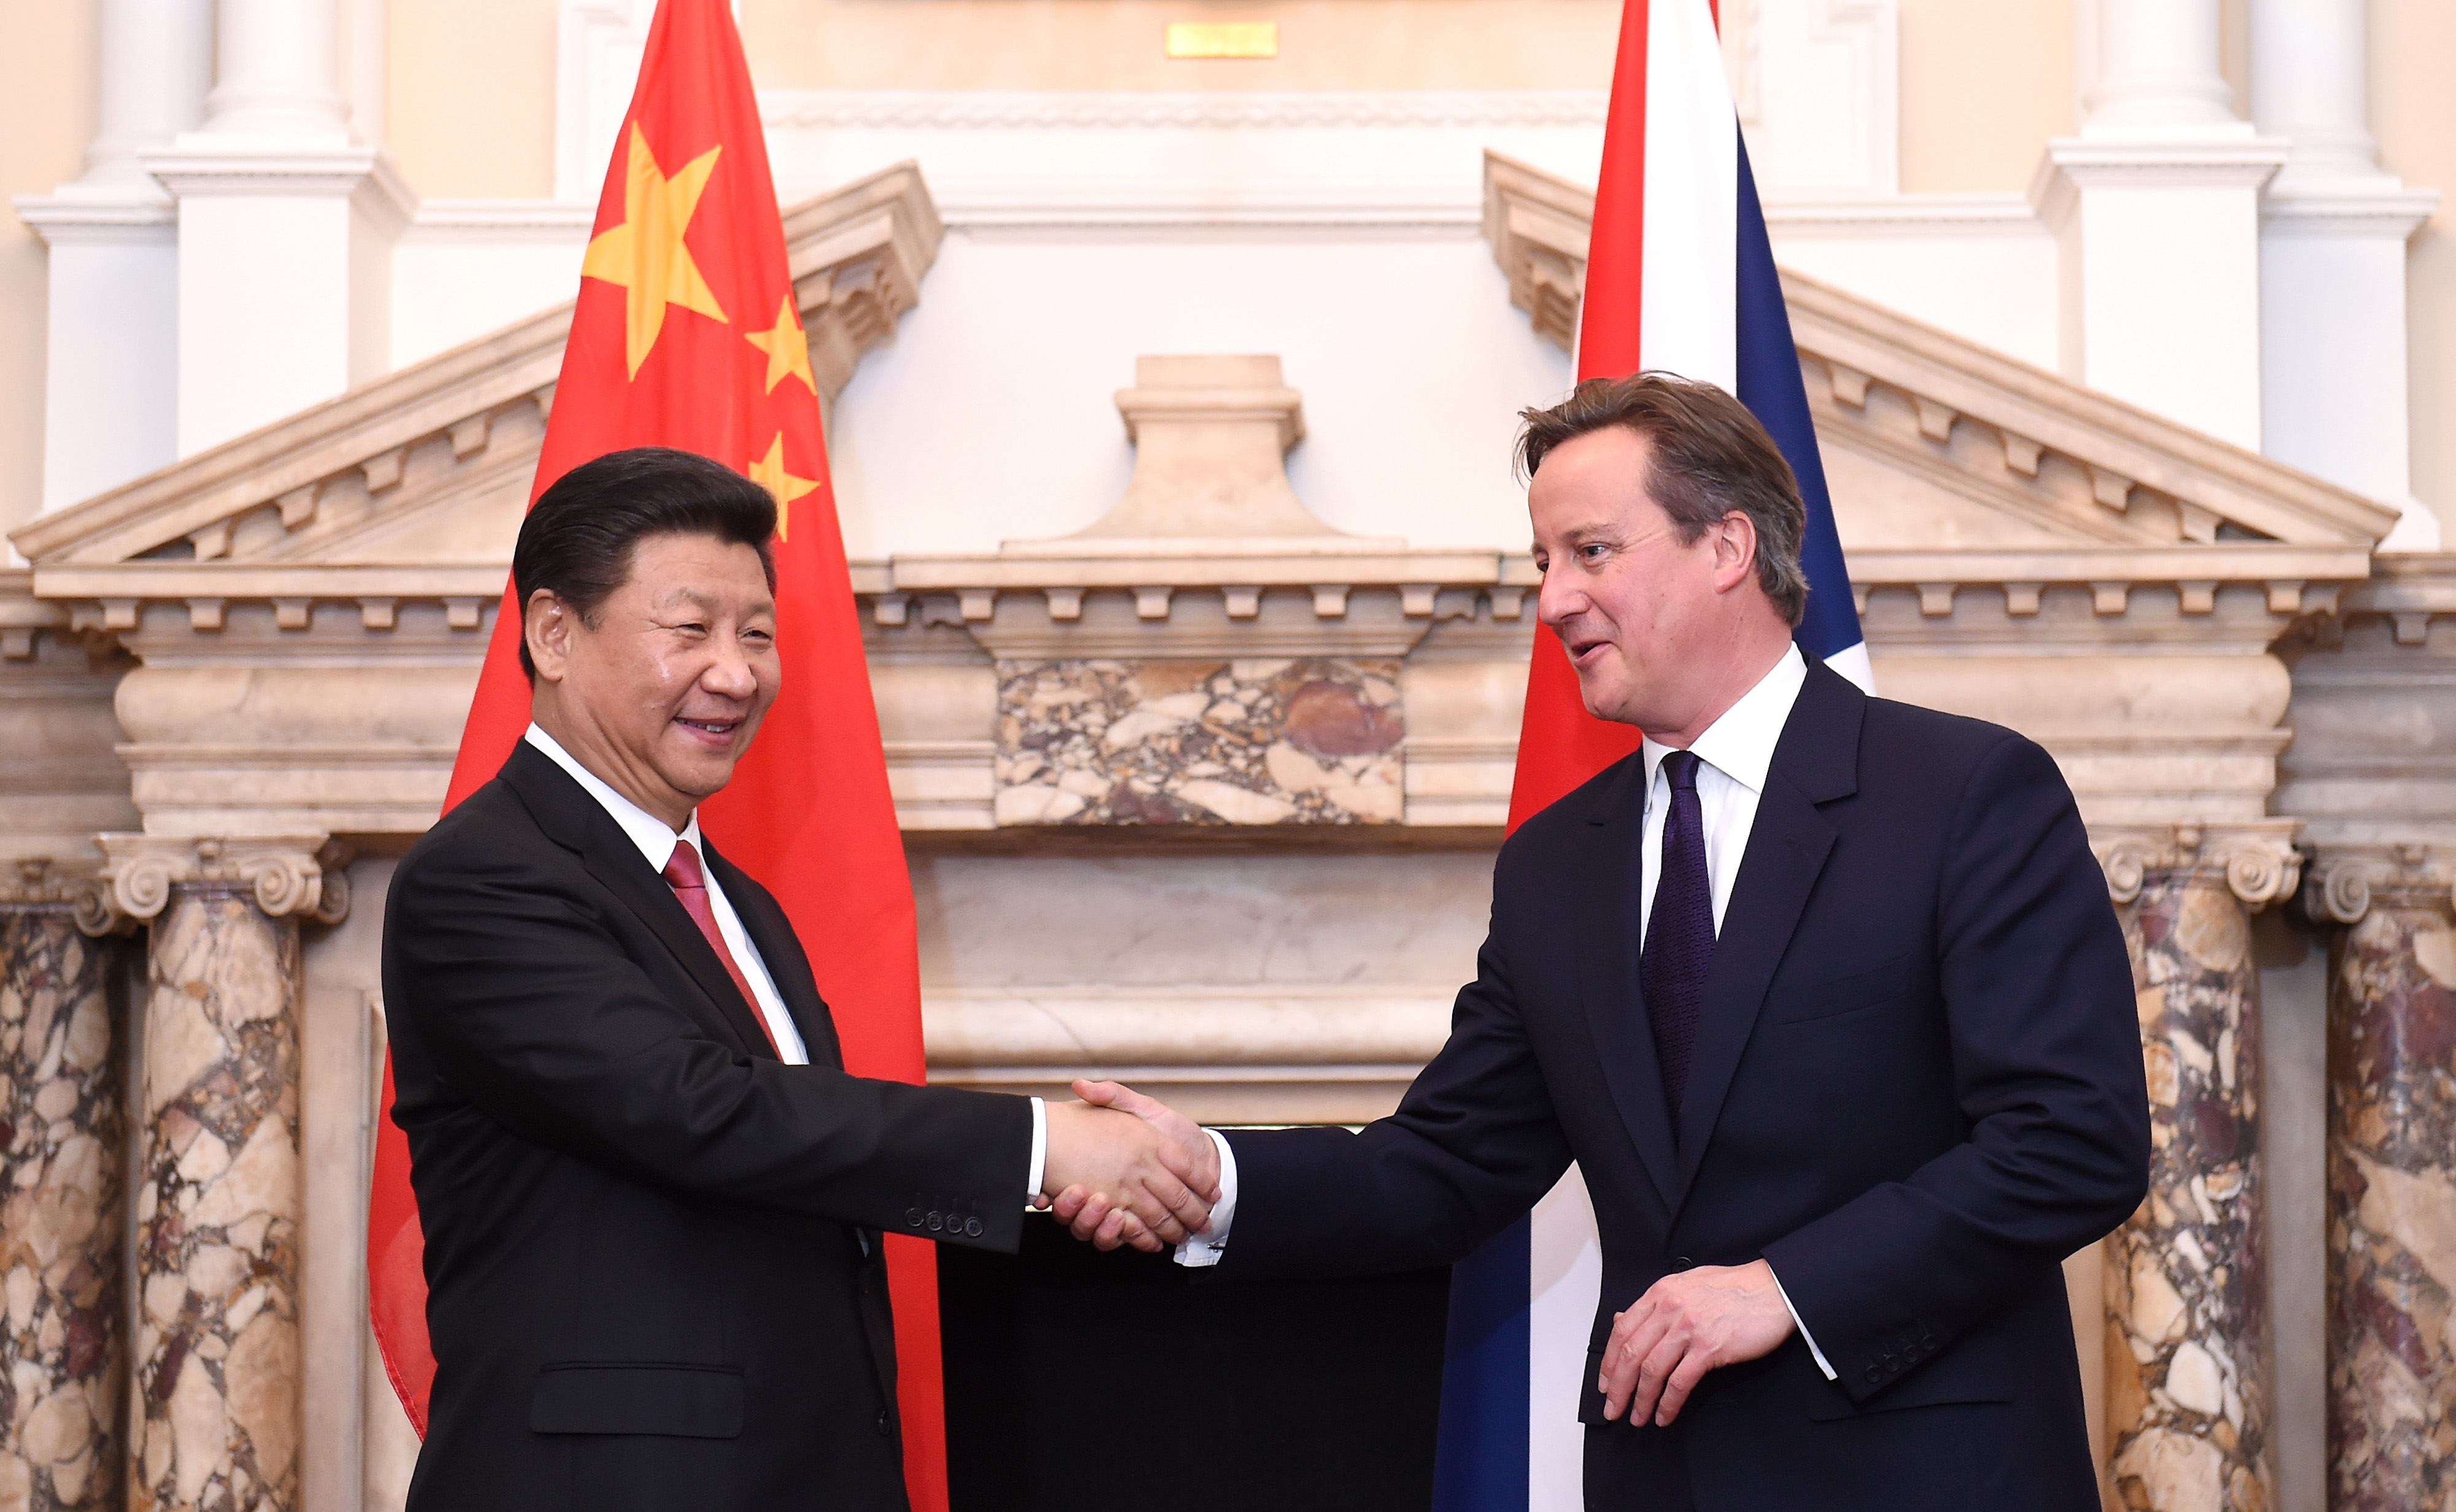 David Cameron, UK prime minister, right, shakes hands with Xi Jinping, China's president, during the UK- China Business Summit held at the Mansion House in London. Photo: Bloomberg